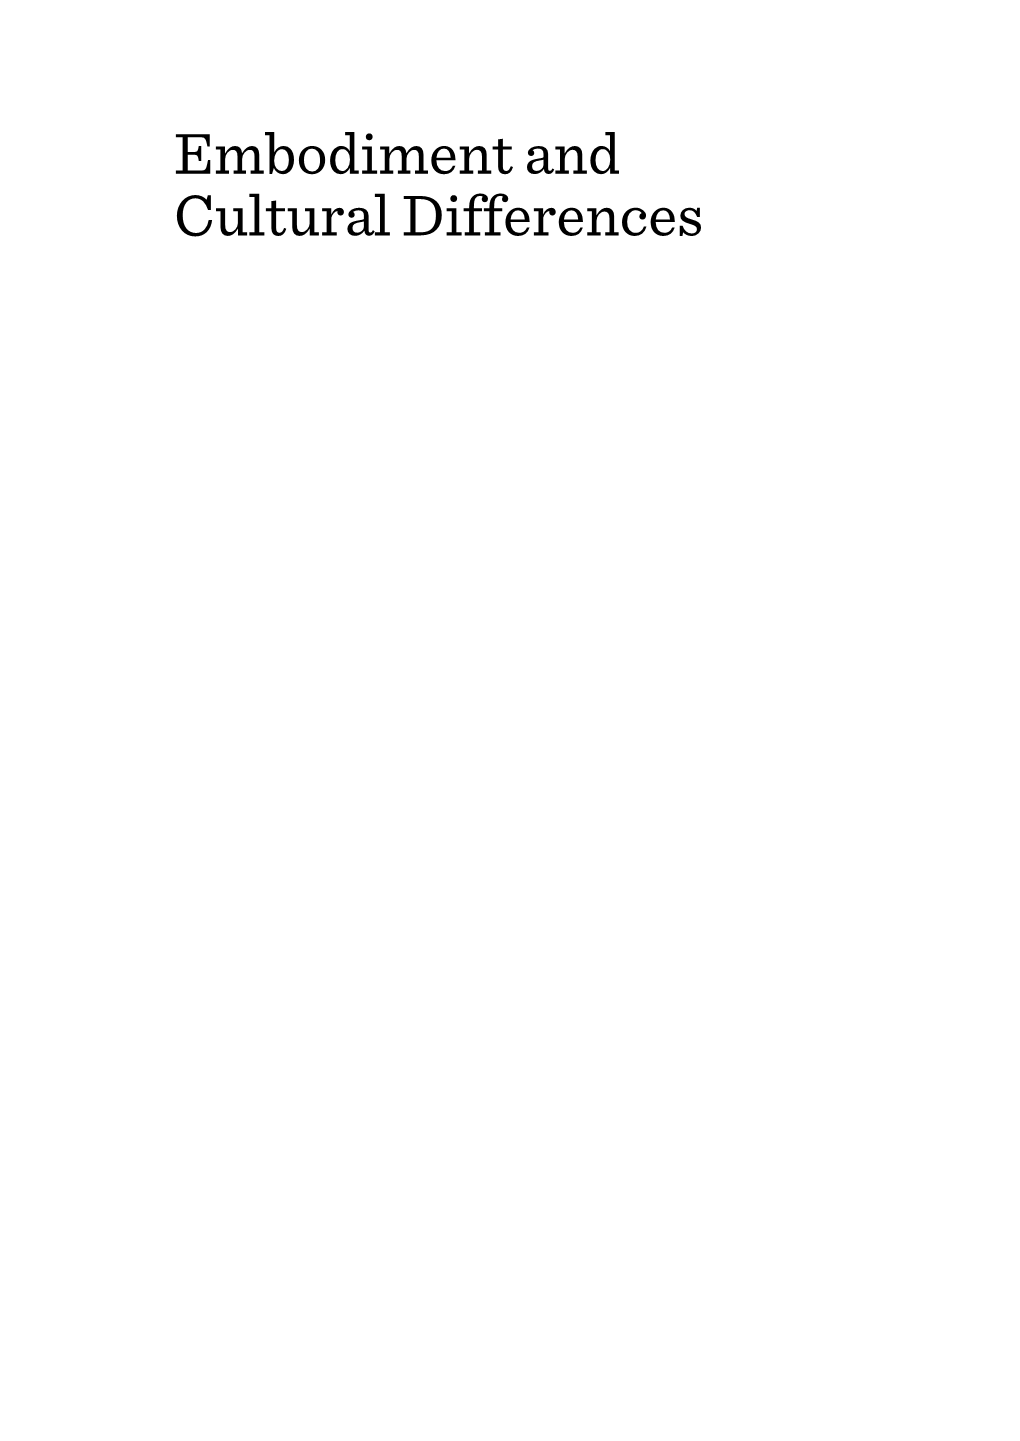 Embodiment and Cultural Differences